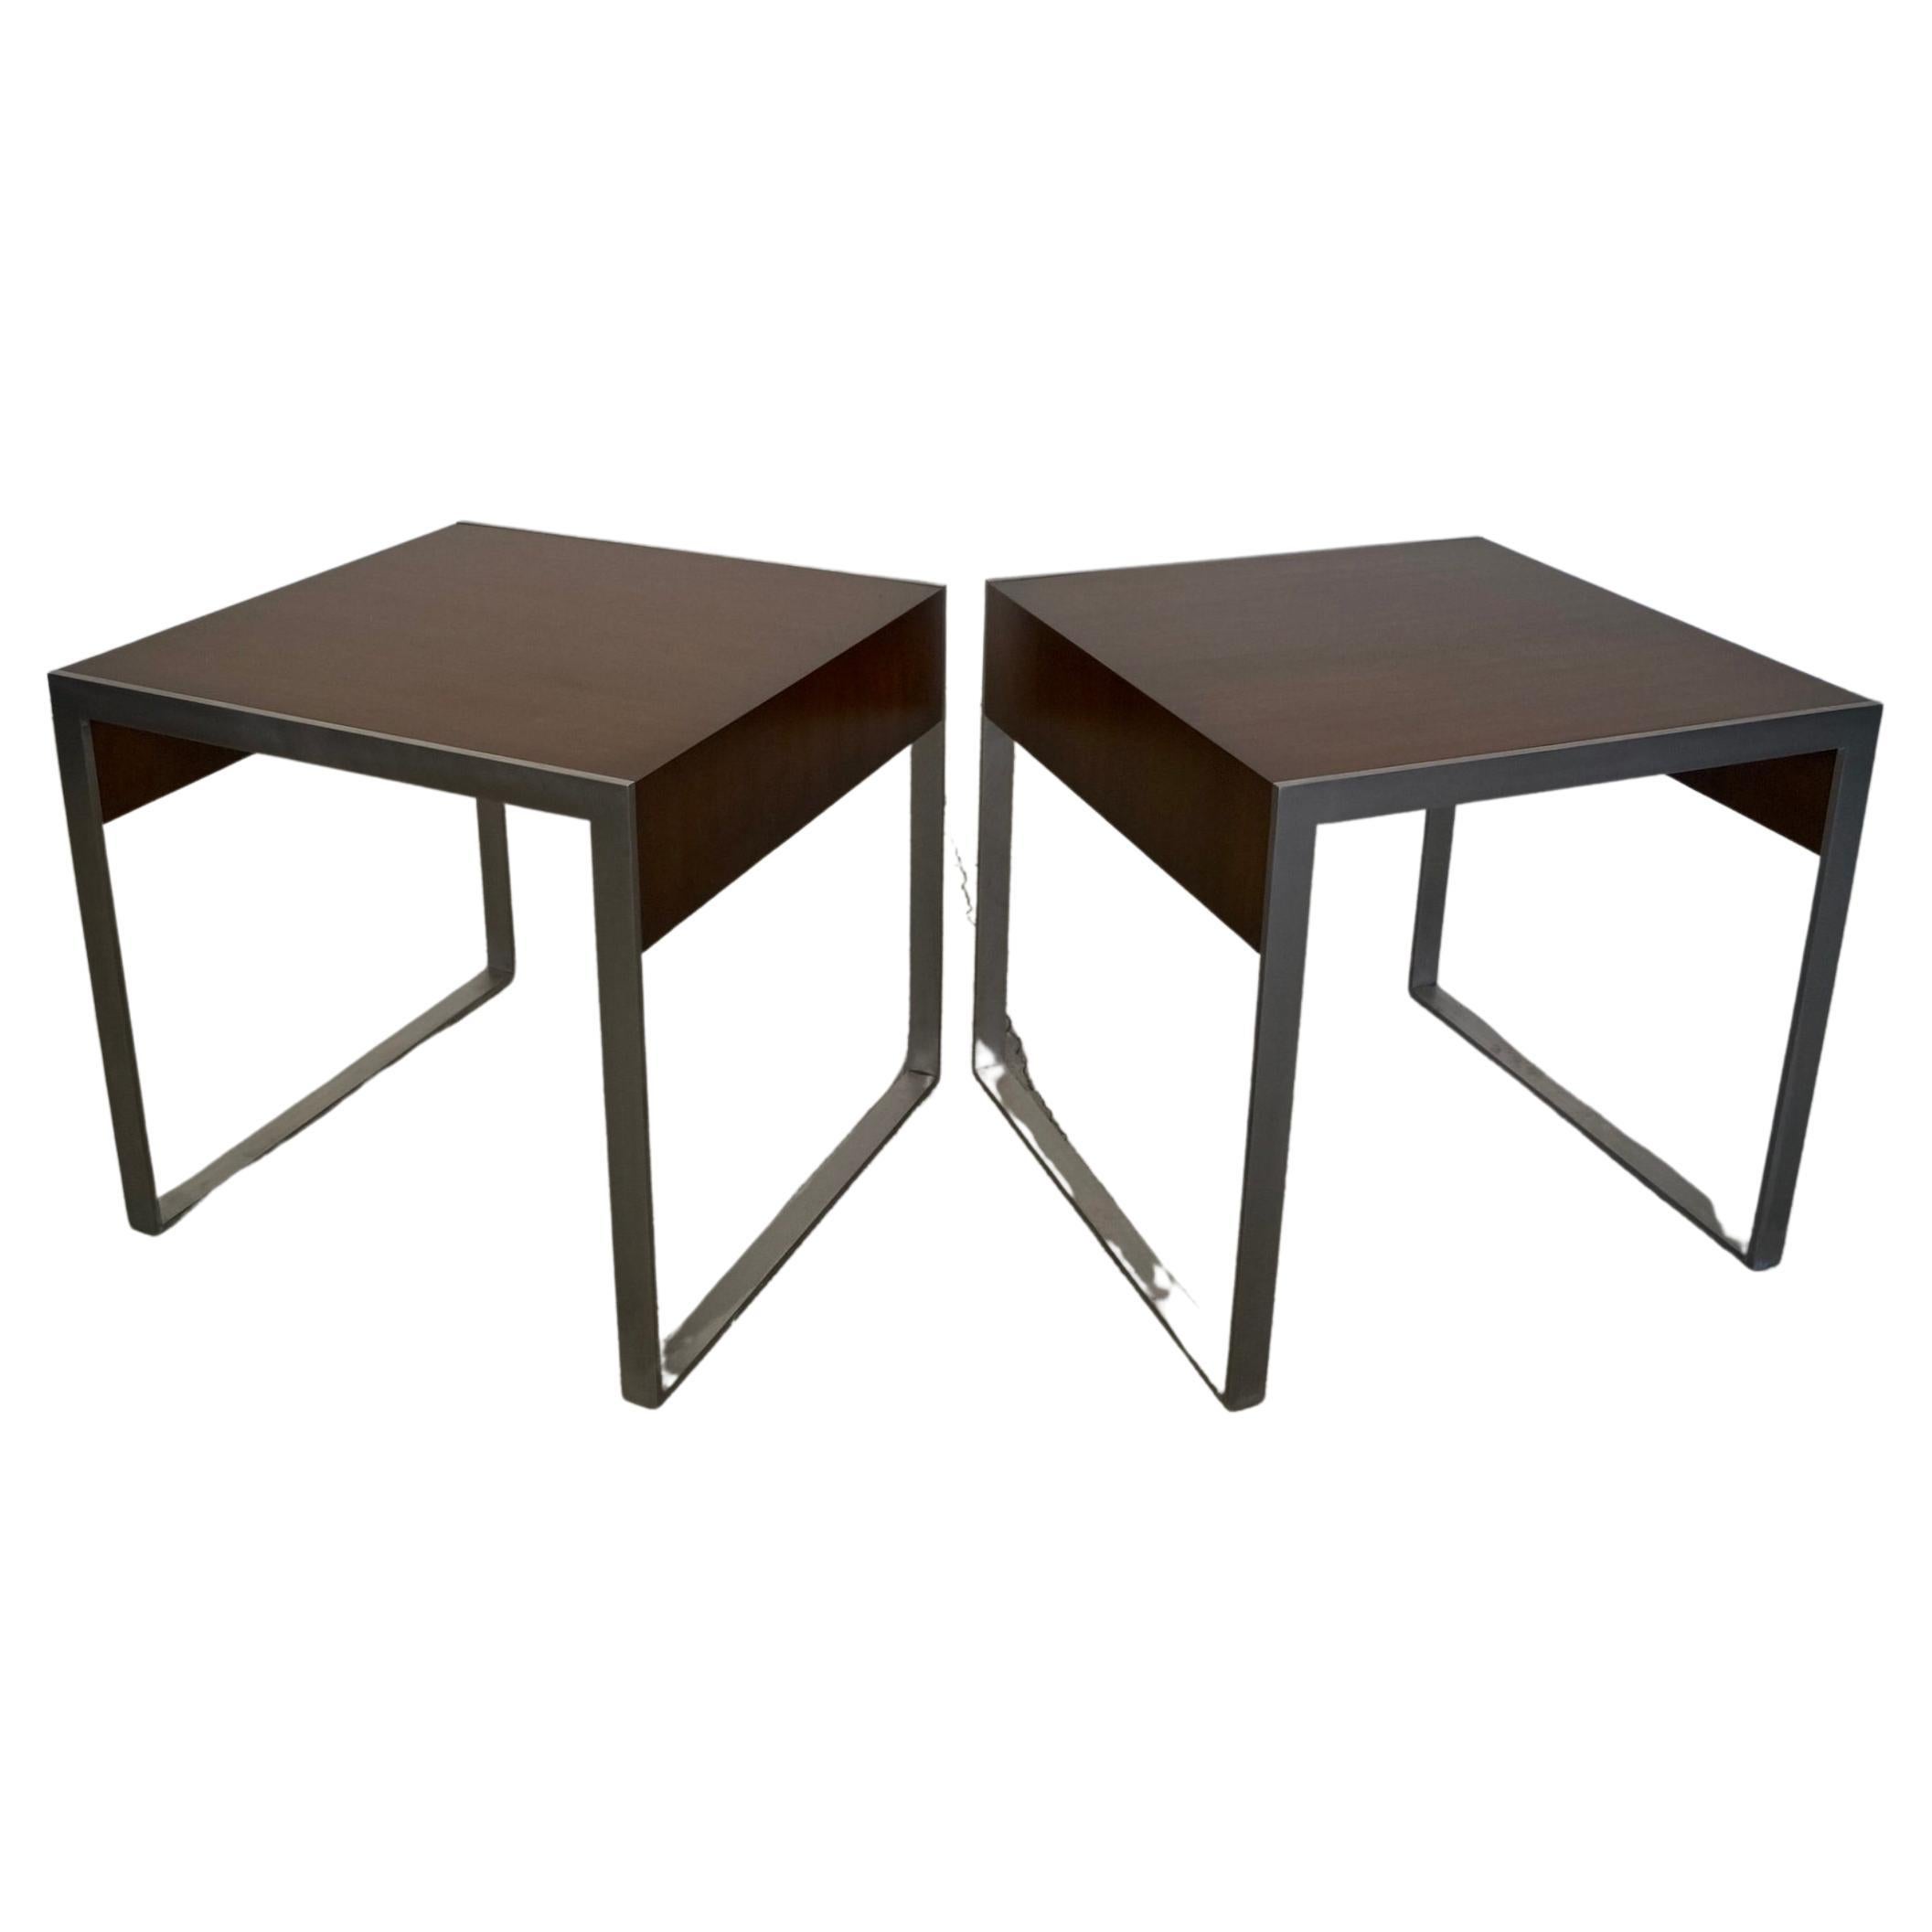 Early Aughts End Tables by Bernhardt, a Pair